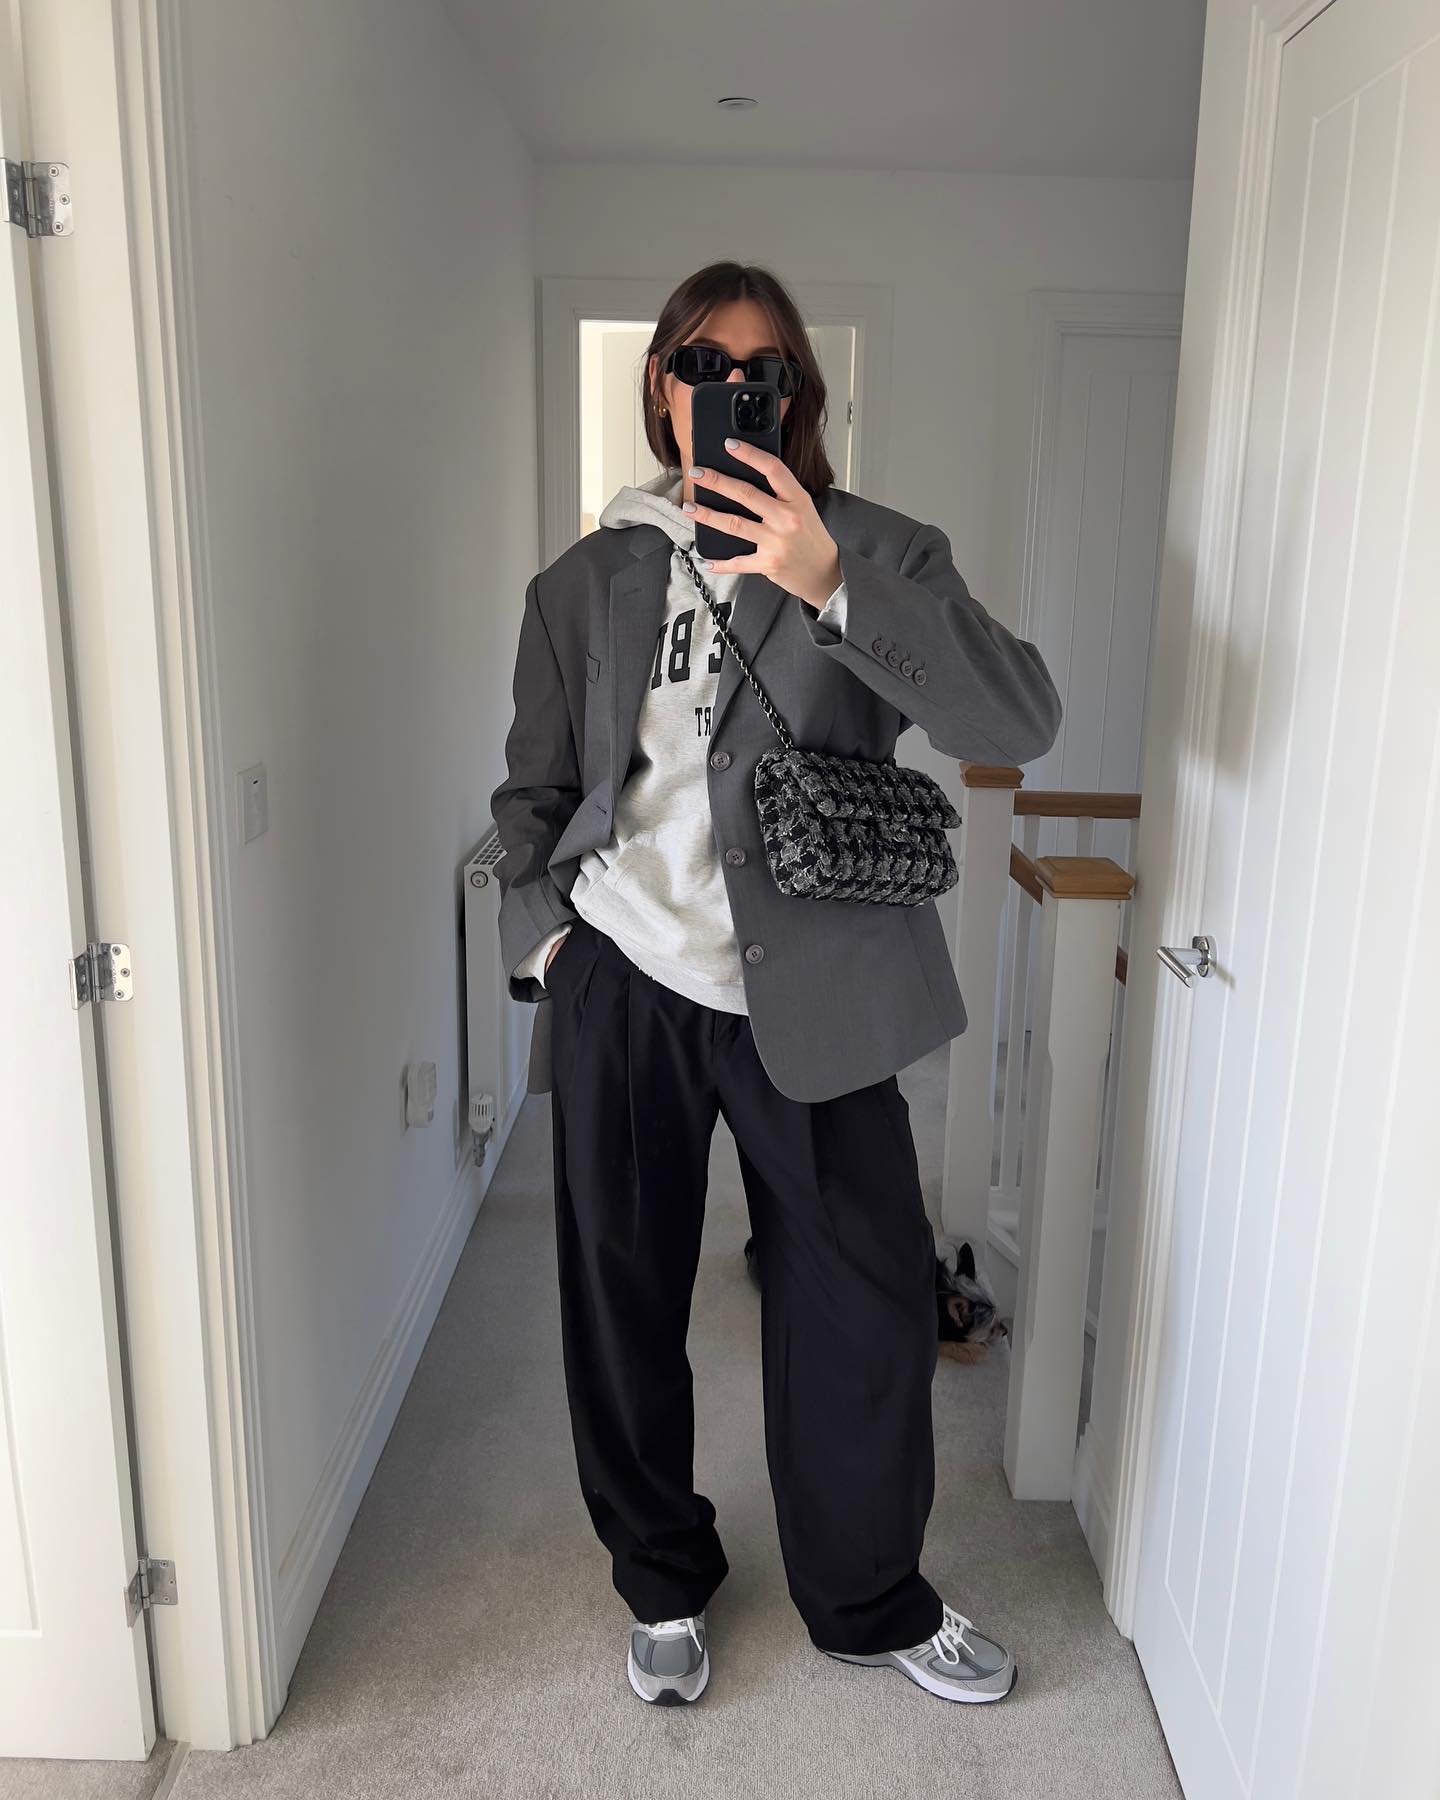 Influencer wears a grey blazer with black trousers and trainers